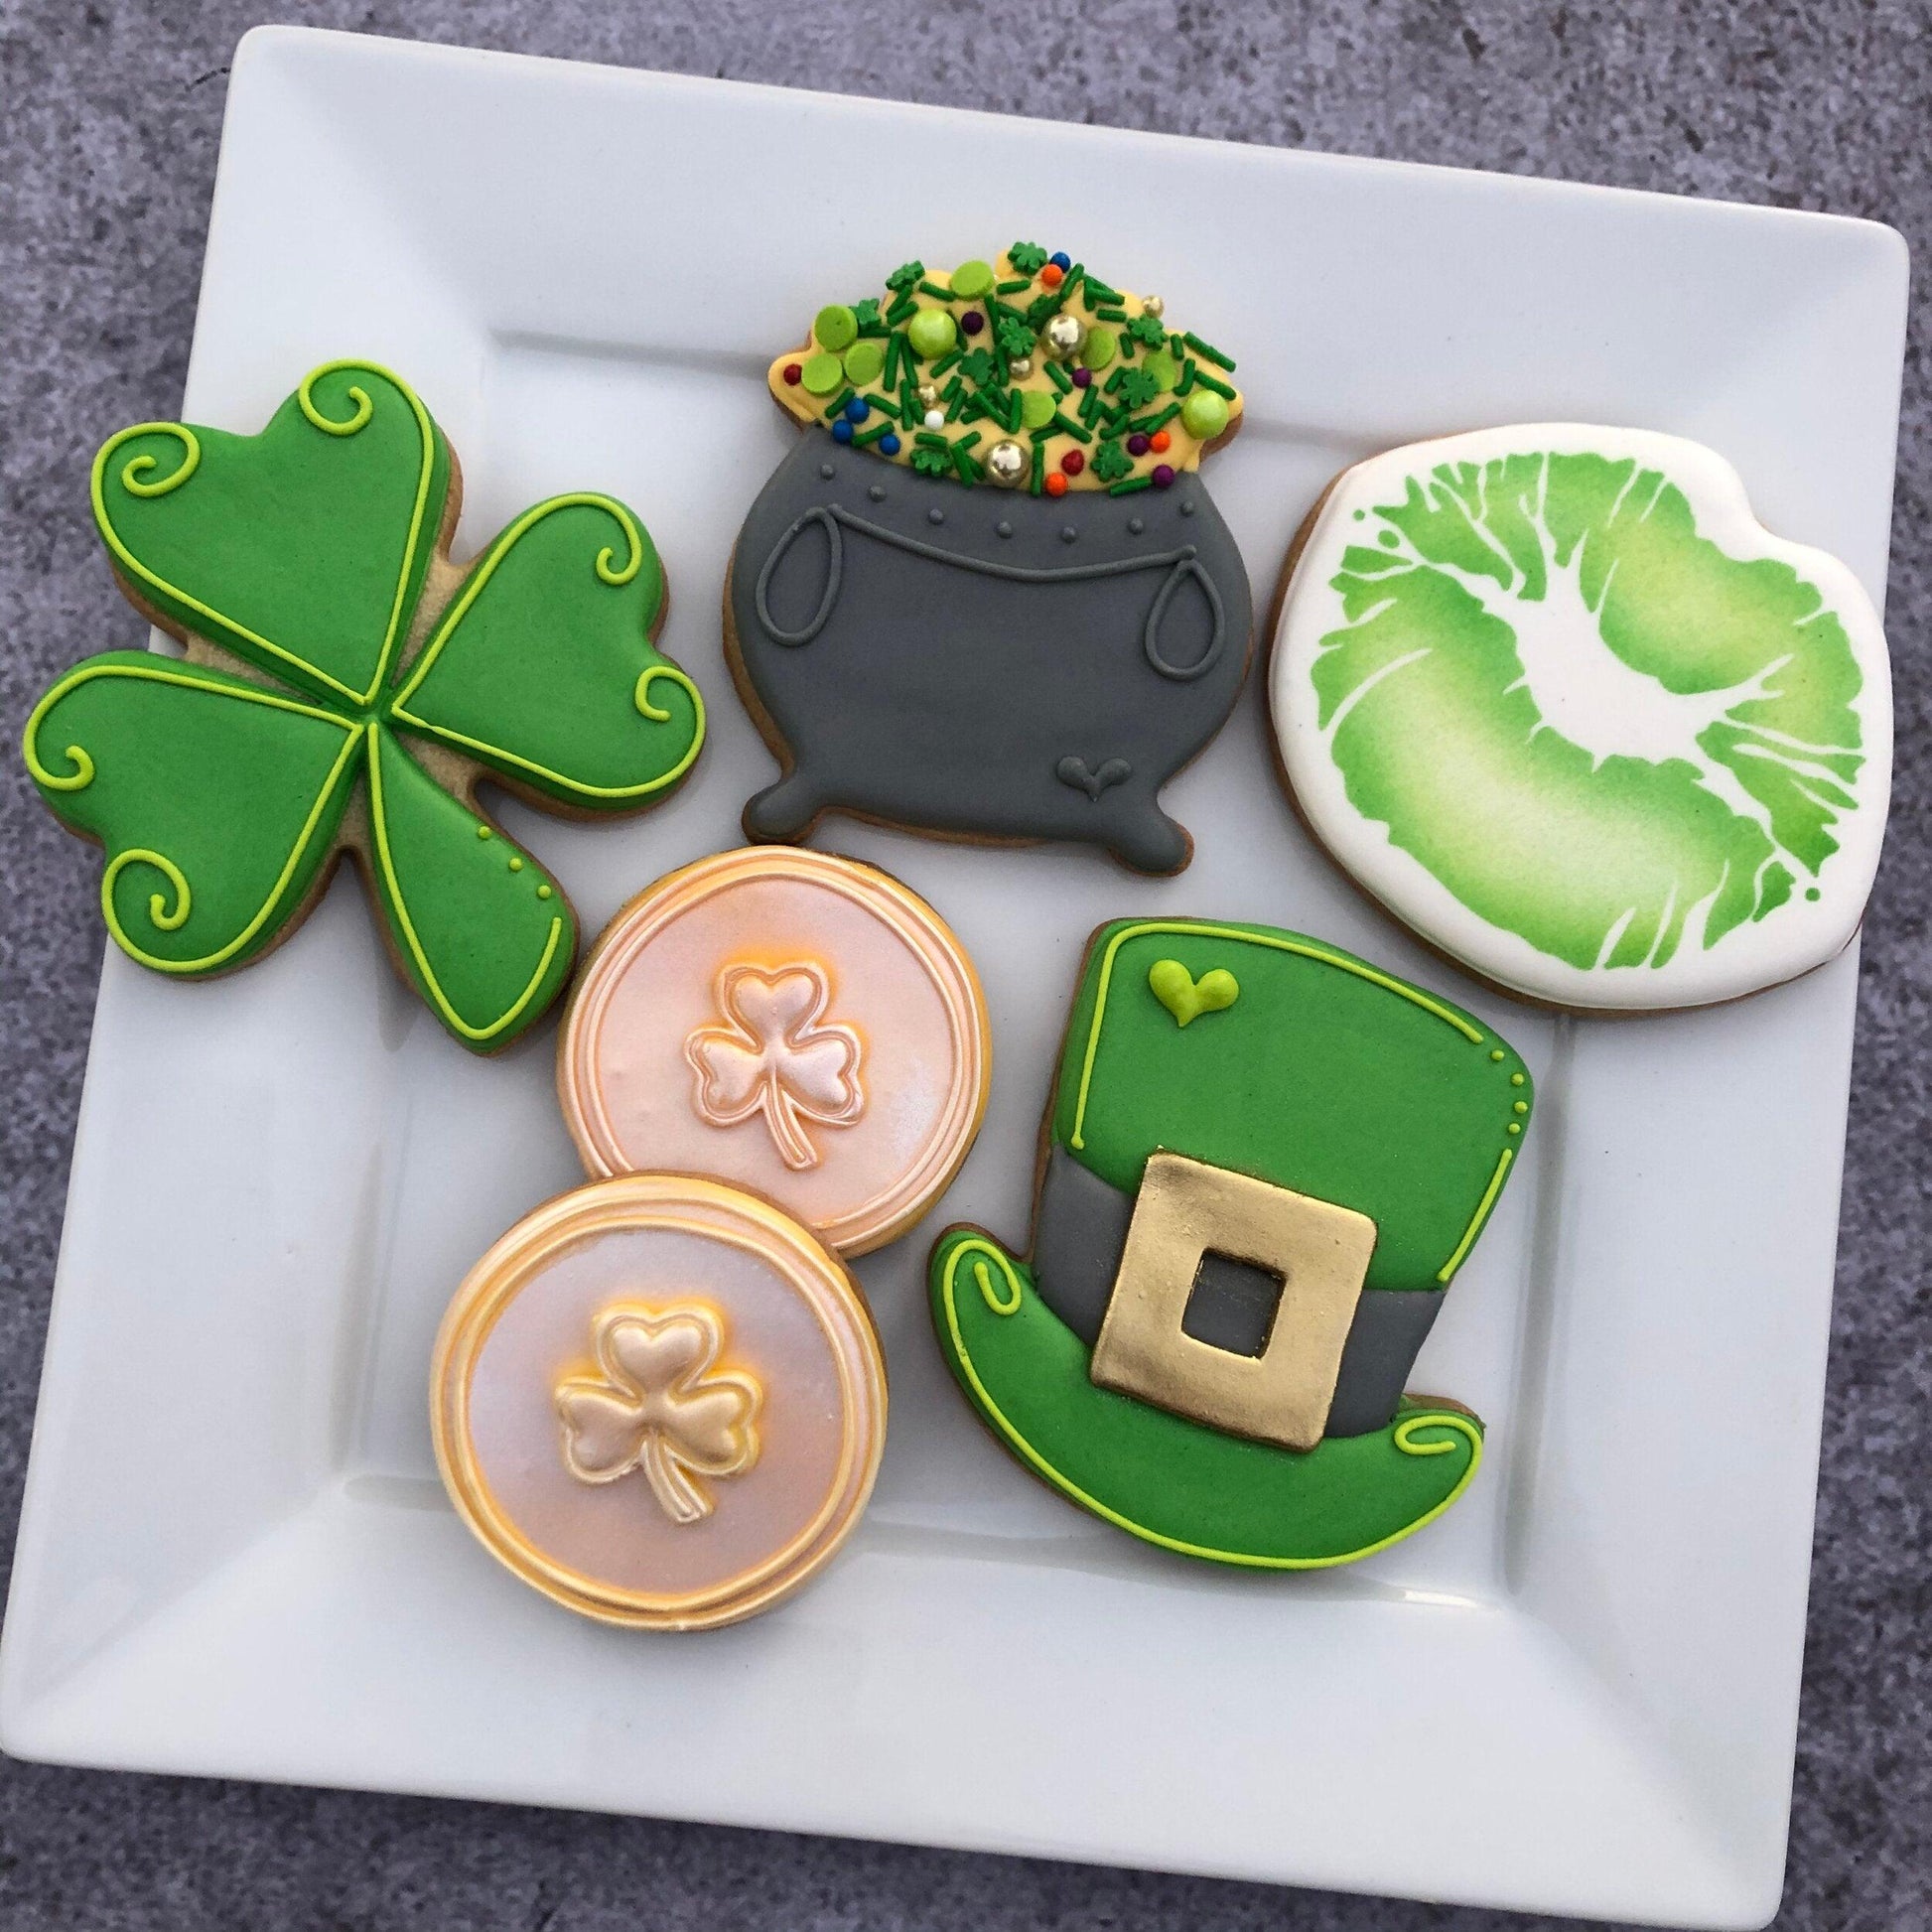 Kiss Me, I'm Irish // All-levels class with airbrushing  ******* MARCH 8th * ( Glendale CA ) - Designer Cookies ® STUDIO